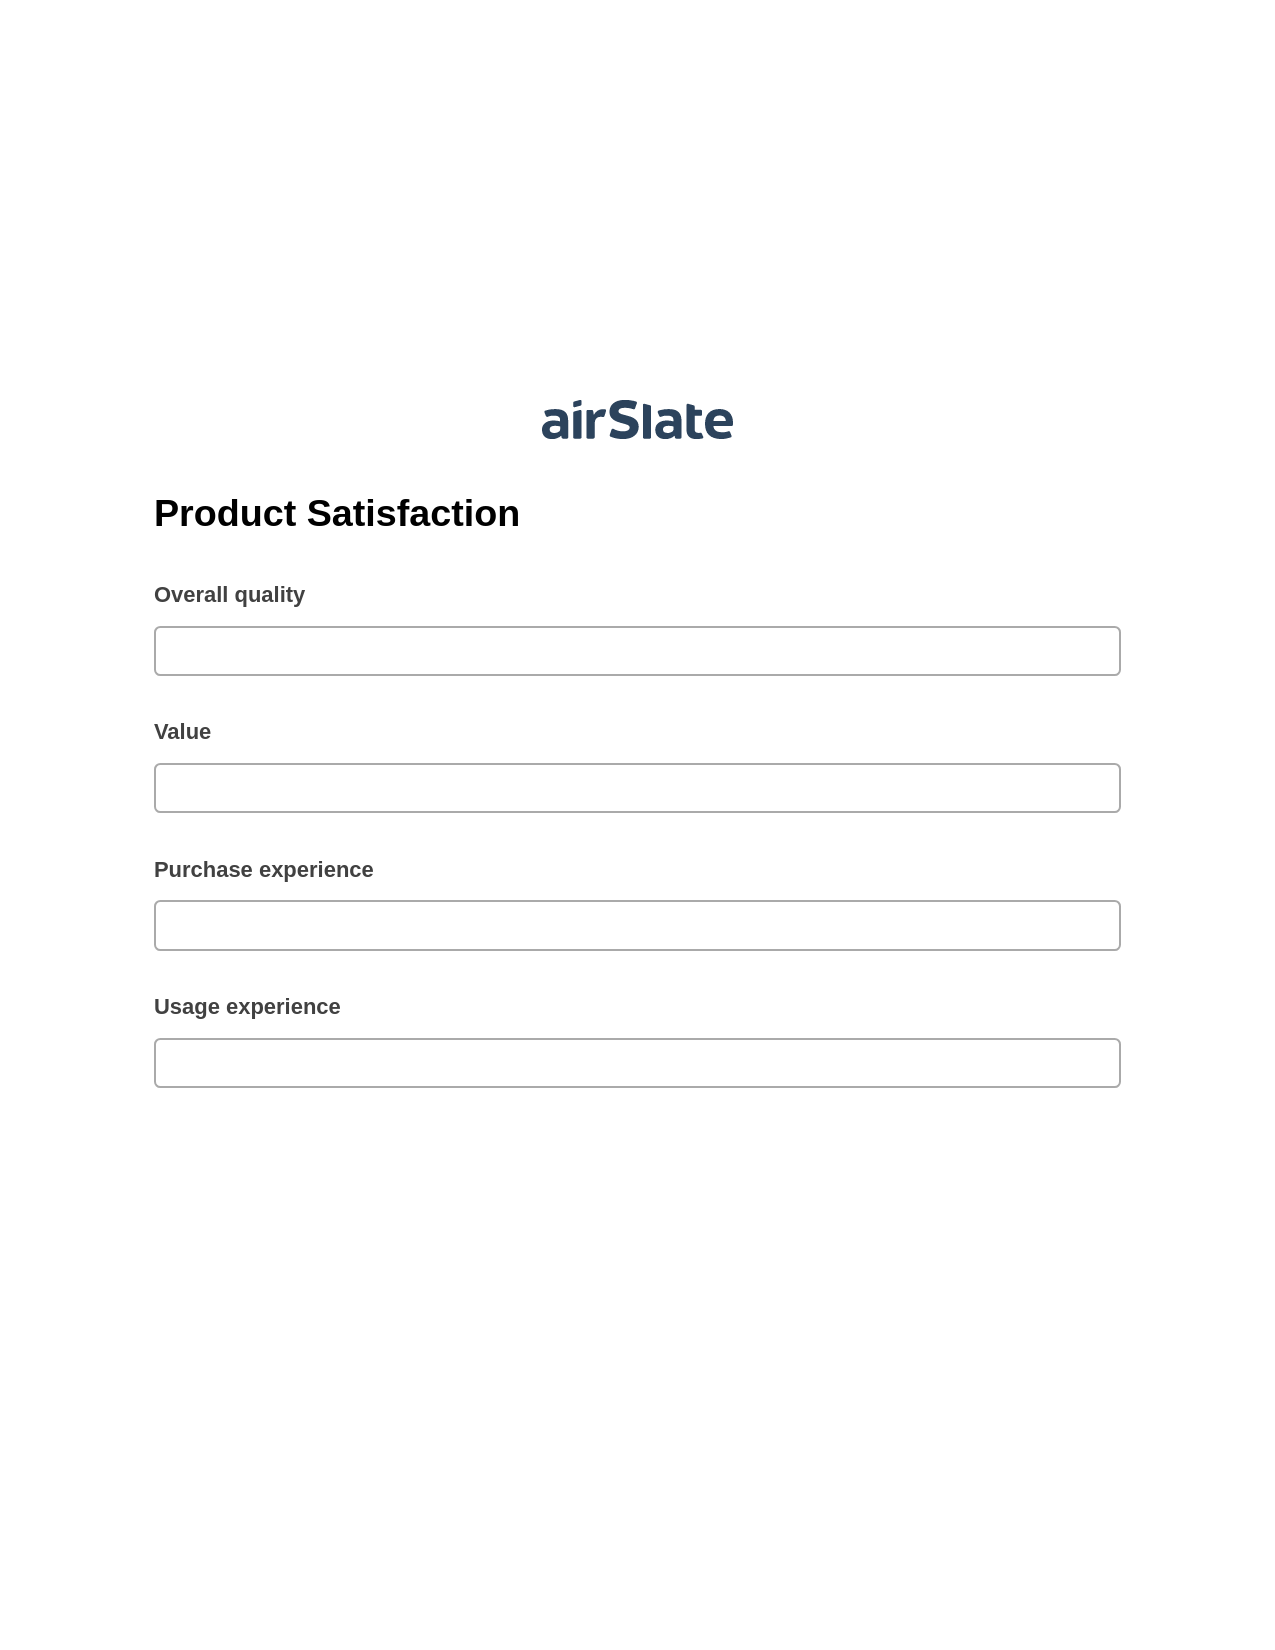 Multirole Product Satisfaction Pre-fill from CSV File Bot, Update Salesforce Record Bot, Export to Salesforce Bot